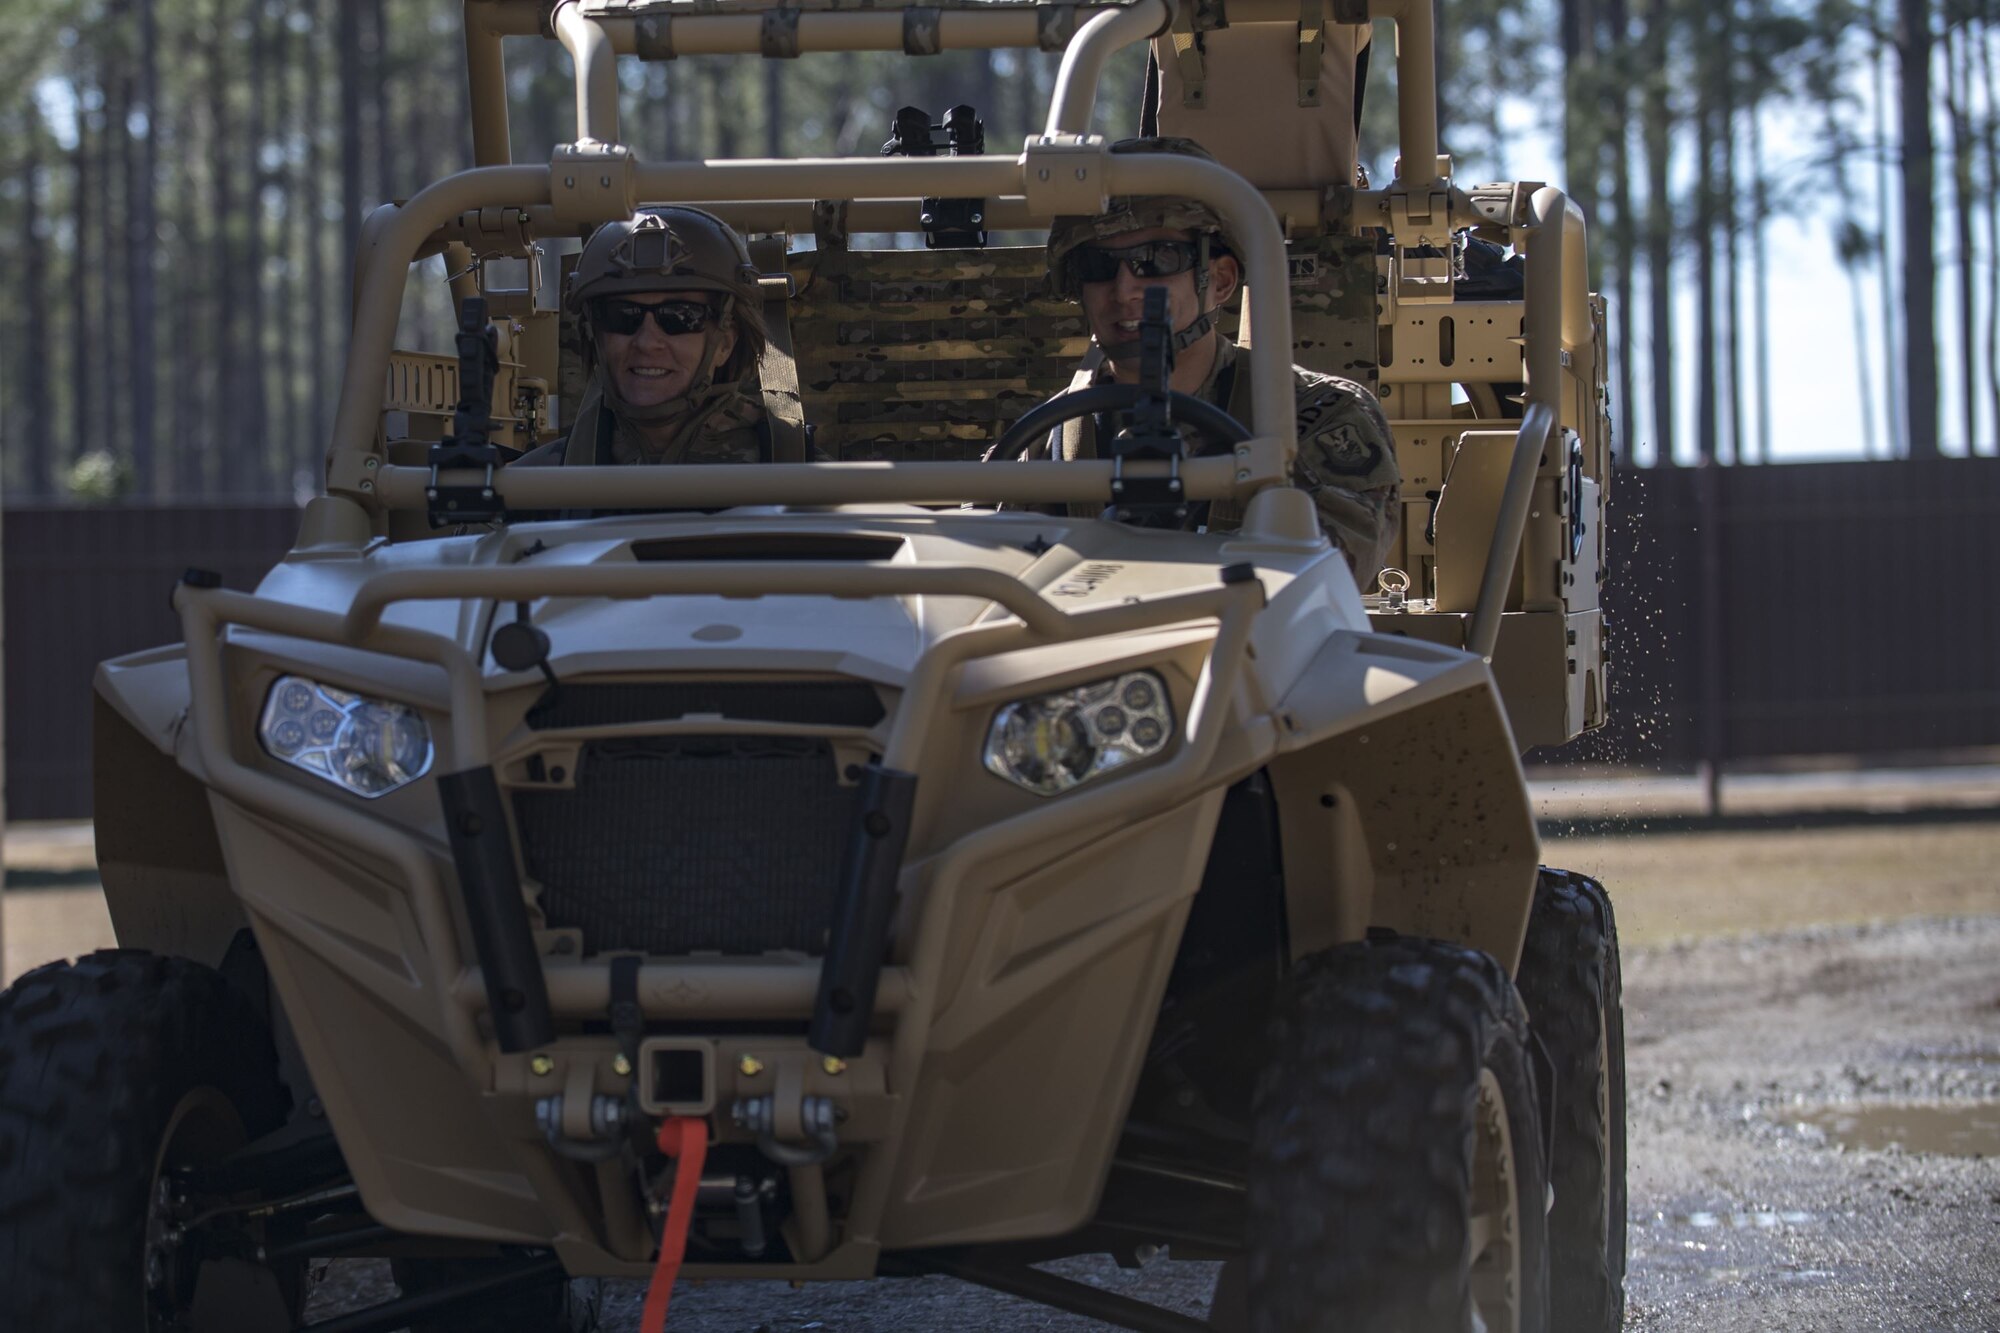 An Airman assigned to the 820th Base Defense Group escorts Col. Jennifer Short, 23d Wing commander, to a Military Operations in Urban Terrain village during a capabilities demonstration, Feb. 5, 2018, at Moody Air Force Base, Ga. The immersion was designed to give the 23d Wing’s leadership a better understanding of the 820th BDG’s mission, capabilities and training needs. (U.S. Air Force photo by Senior Airman Daniel Snider)